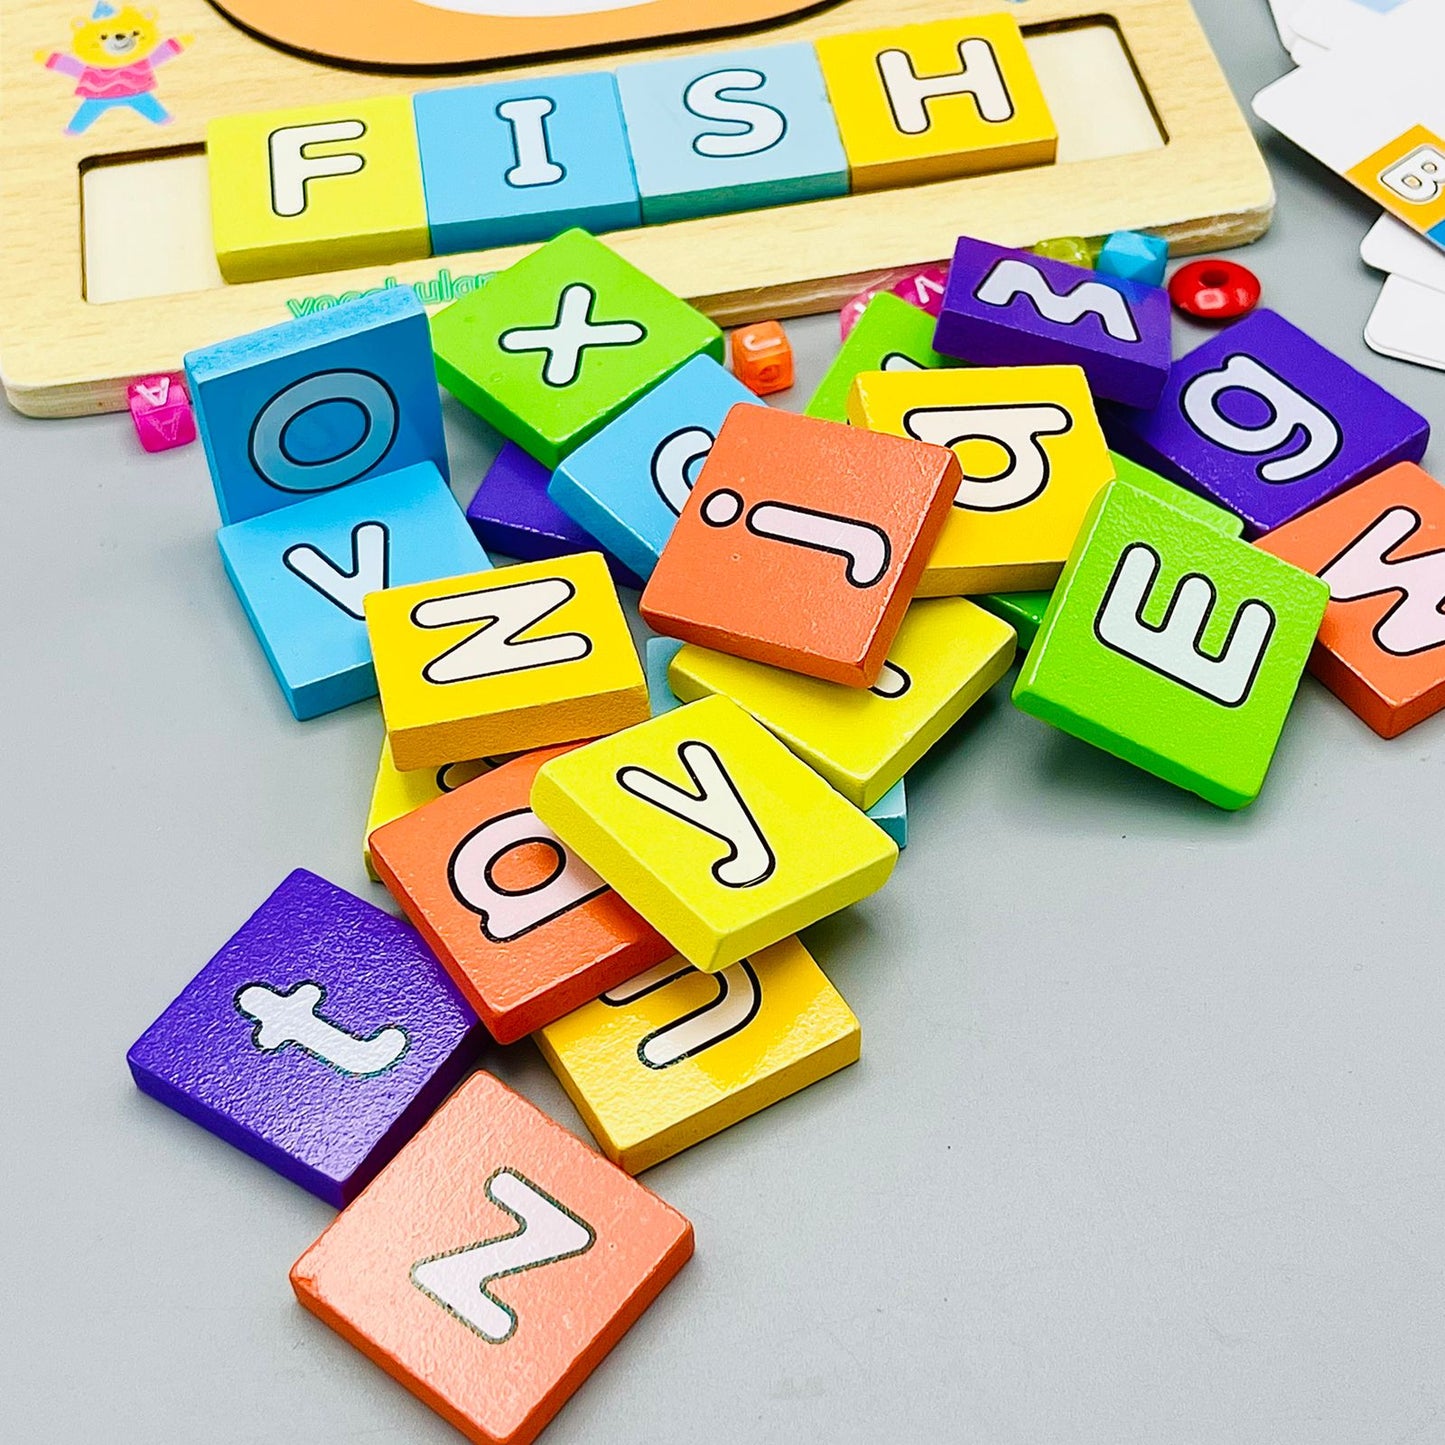 Wooden Alphabets Spelling, Reading and Color Cognition Puzzles For Kids Preschool Learning and Education